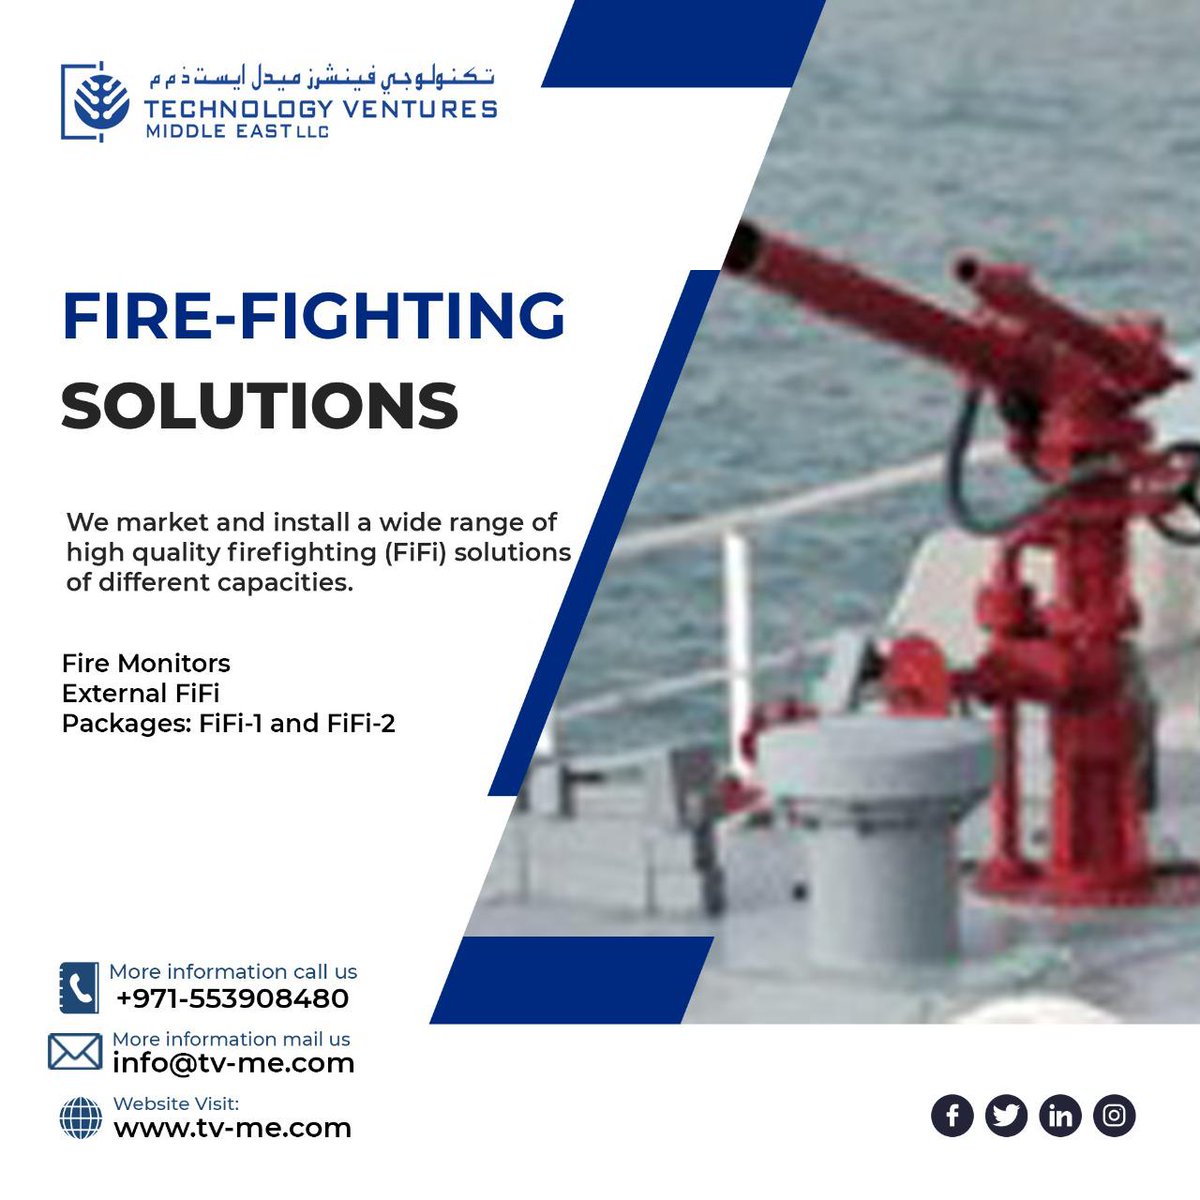 FIRE-FIGHTING #SOLUTIONS

We market and install a wide range of high quality firefighting (FiFi) solutions of different capacities.

    Fire Monitors
    External FiFi
    Packages: FiFi-1 and FiFi-2 https://t.co/N1co6IRhPQ